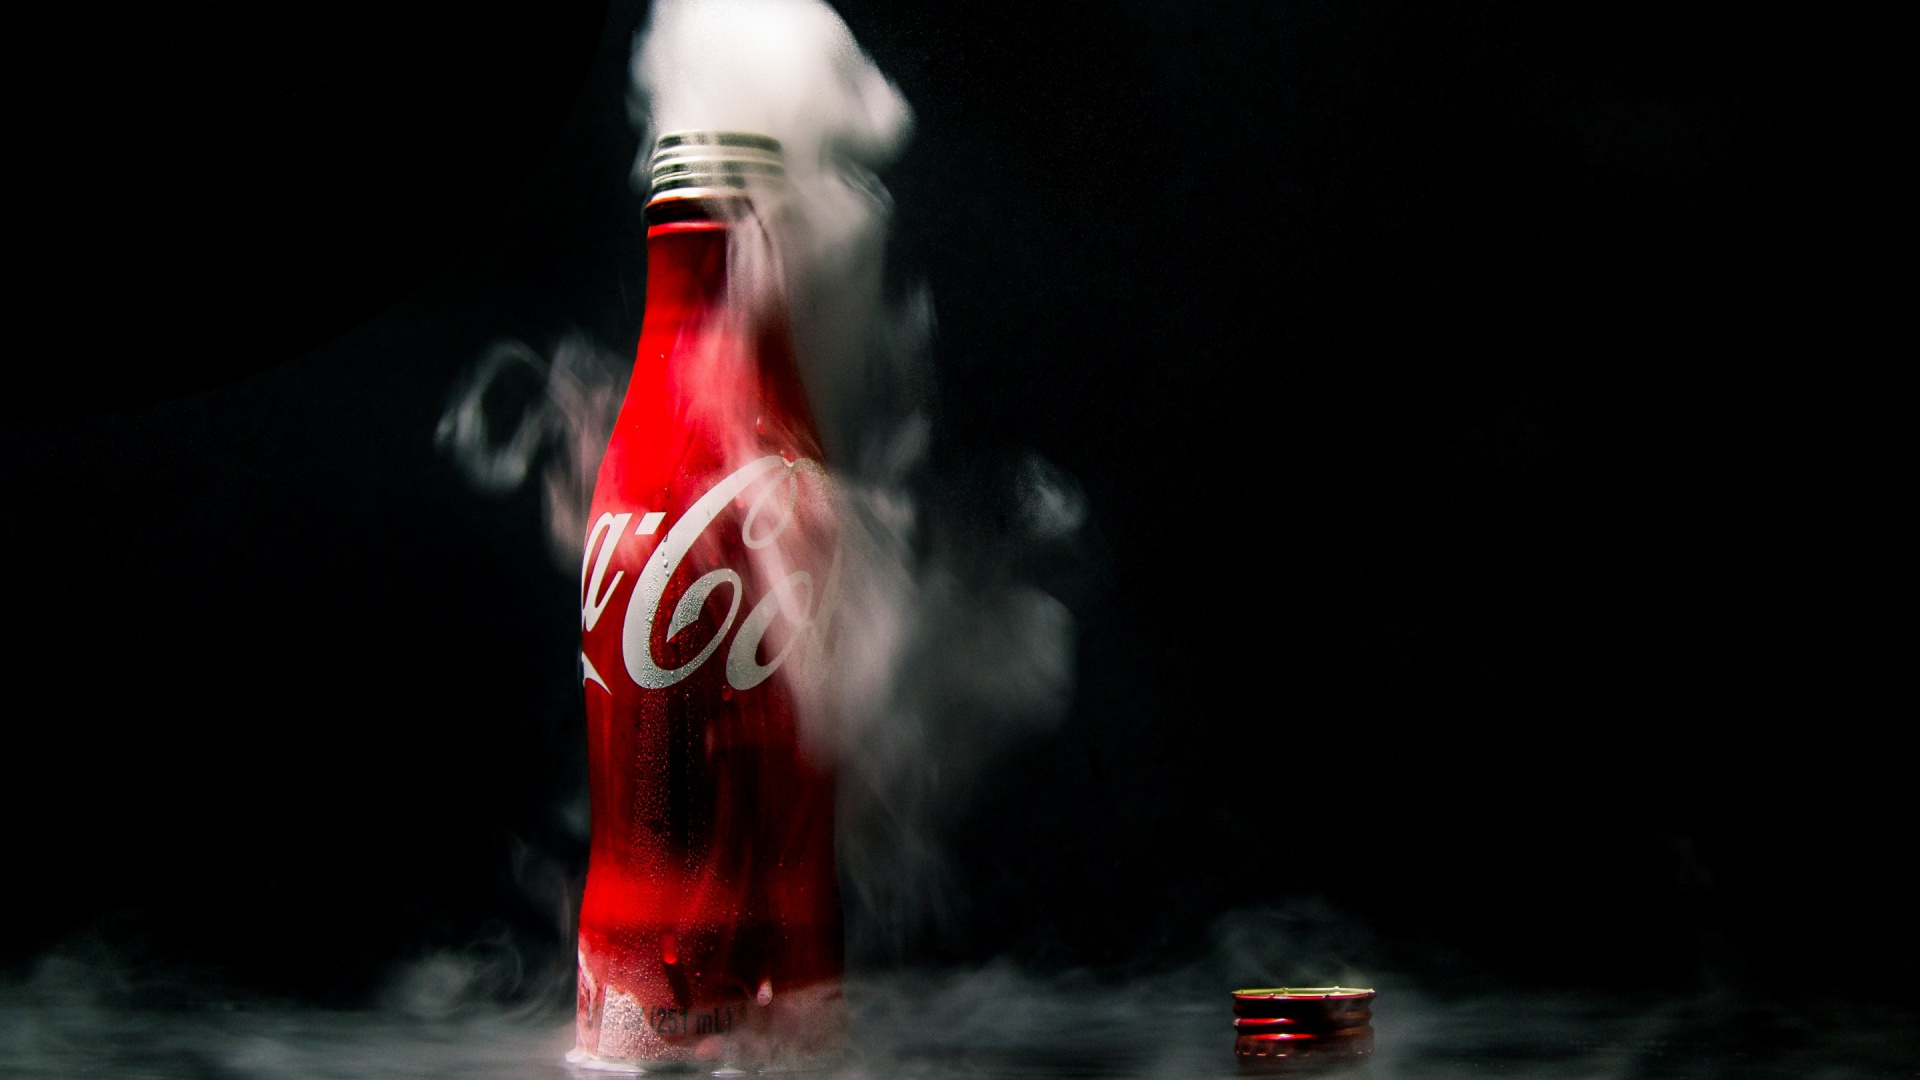 Coca Cola Bottle on Water. Wallpaper in 1920x1080 Resolution